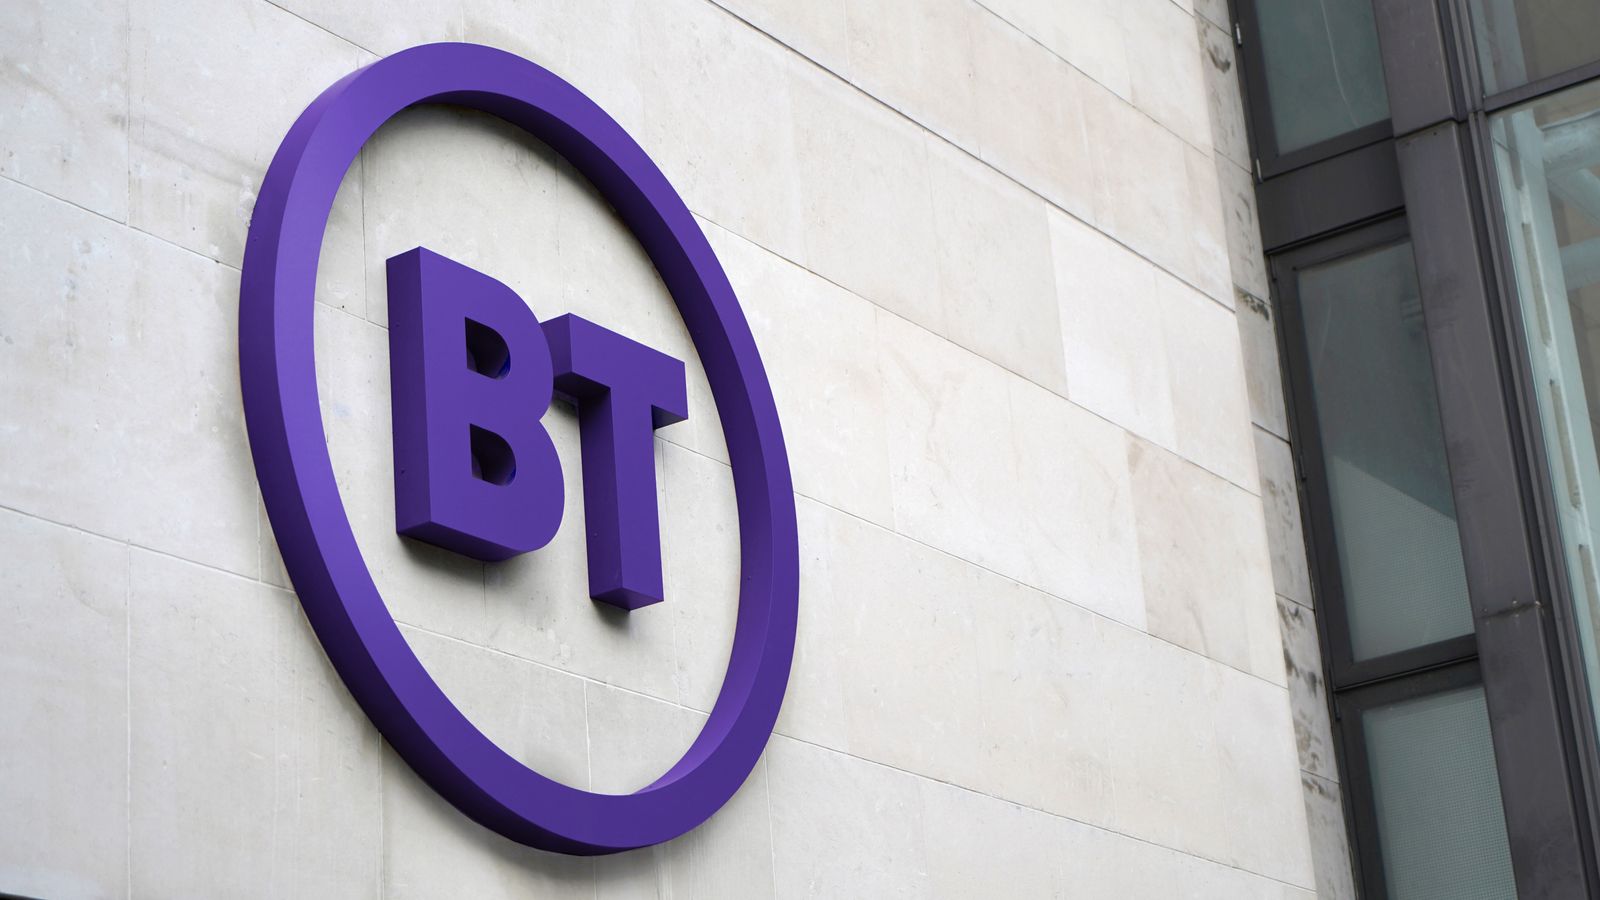 French billionaire's stake in BT to be reviewed over national security concerns